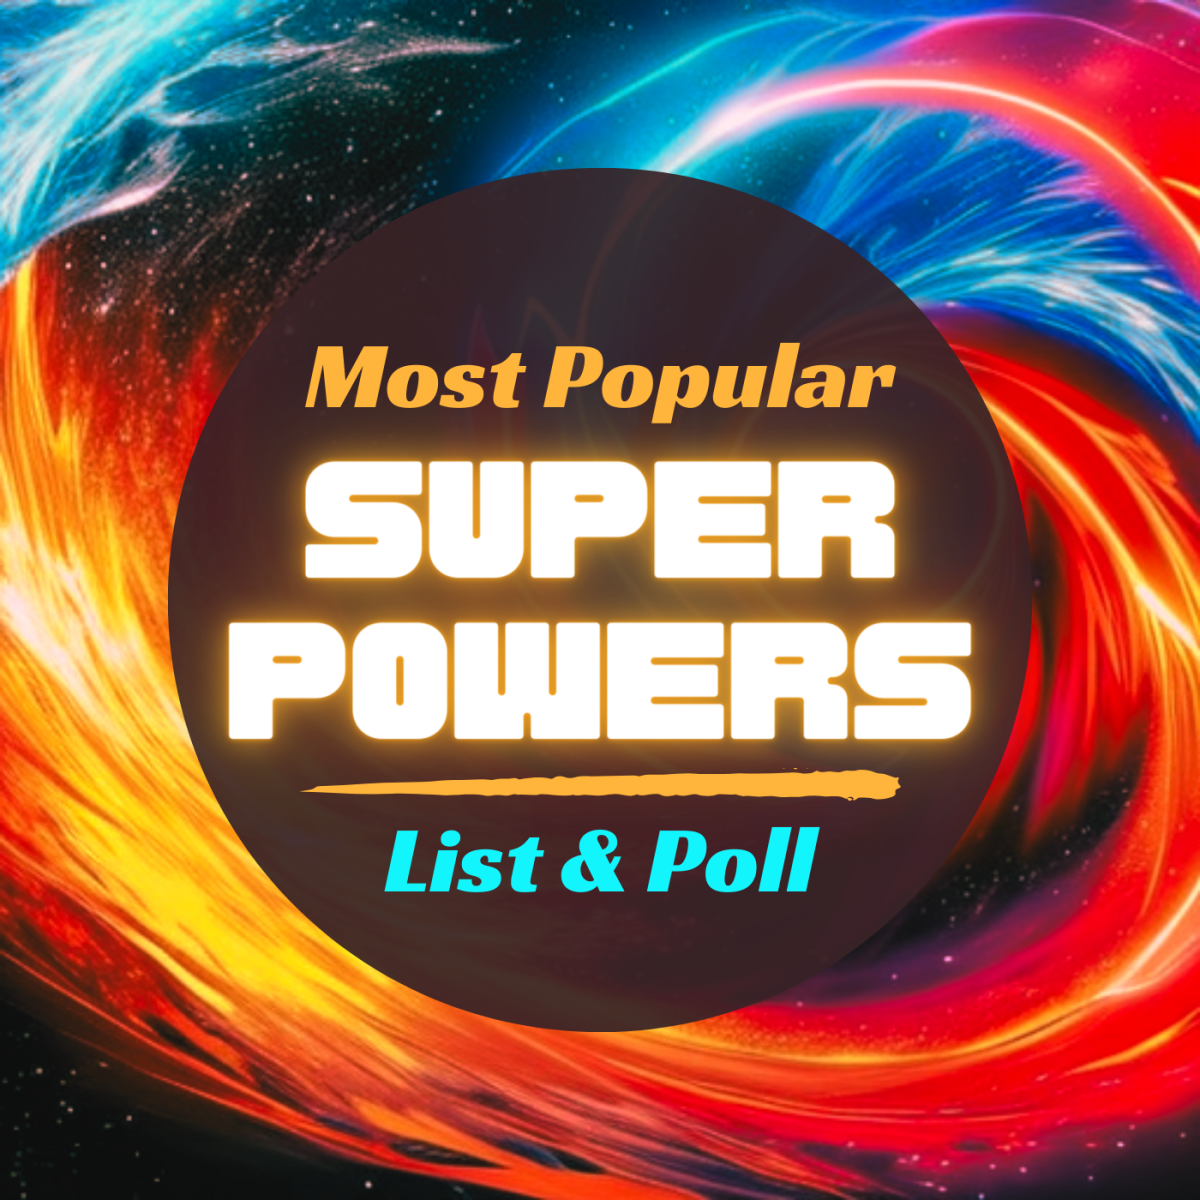 Ultimate List of Superhero Powers: What Power Do You Want?